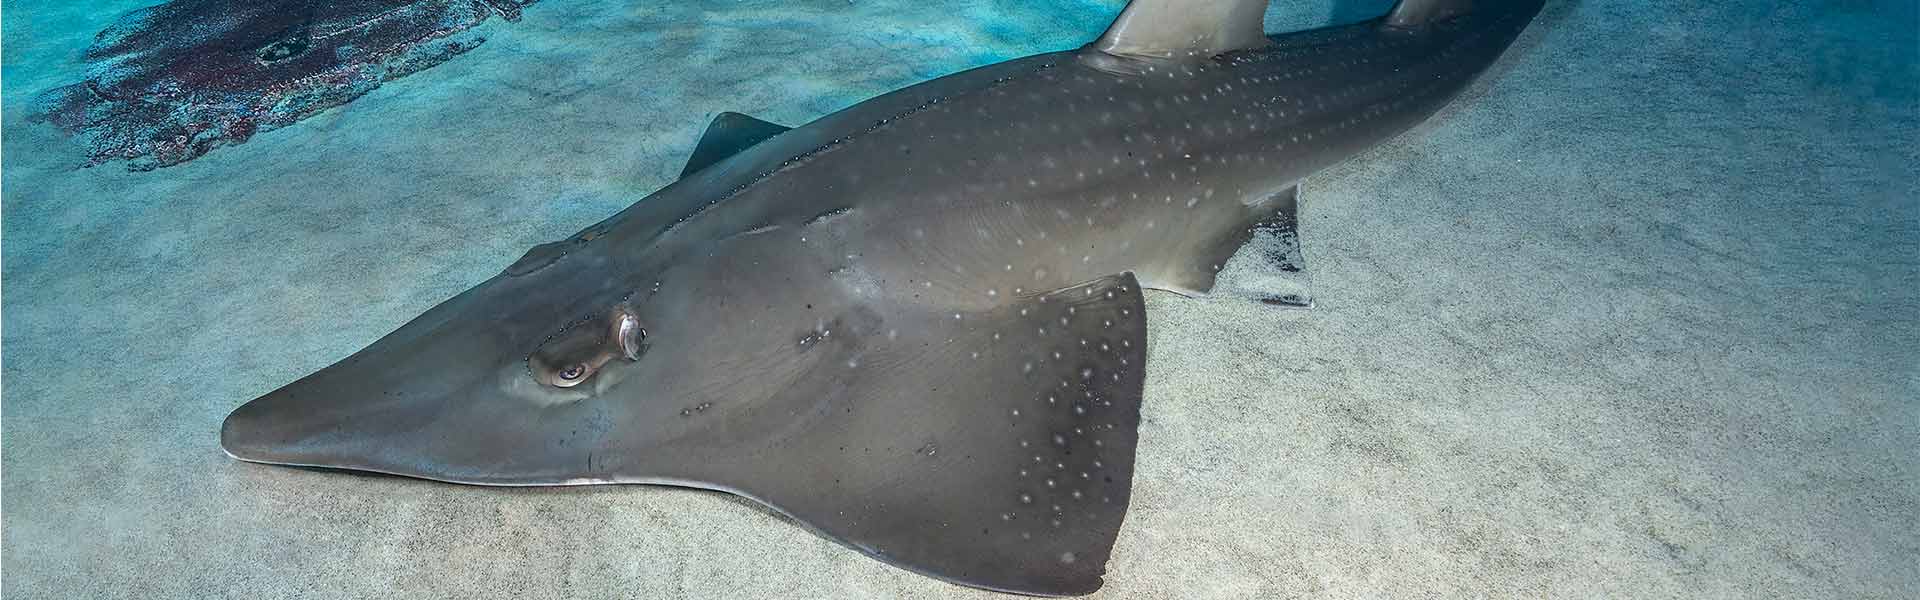 Whitespotted Wedgefish: Discovering the Secrets of These Intriguing Marine Inhabitants